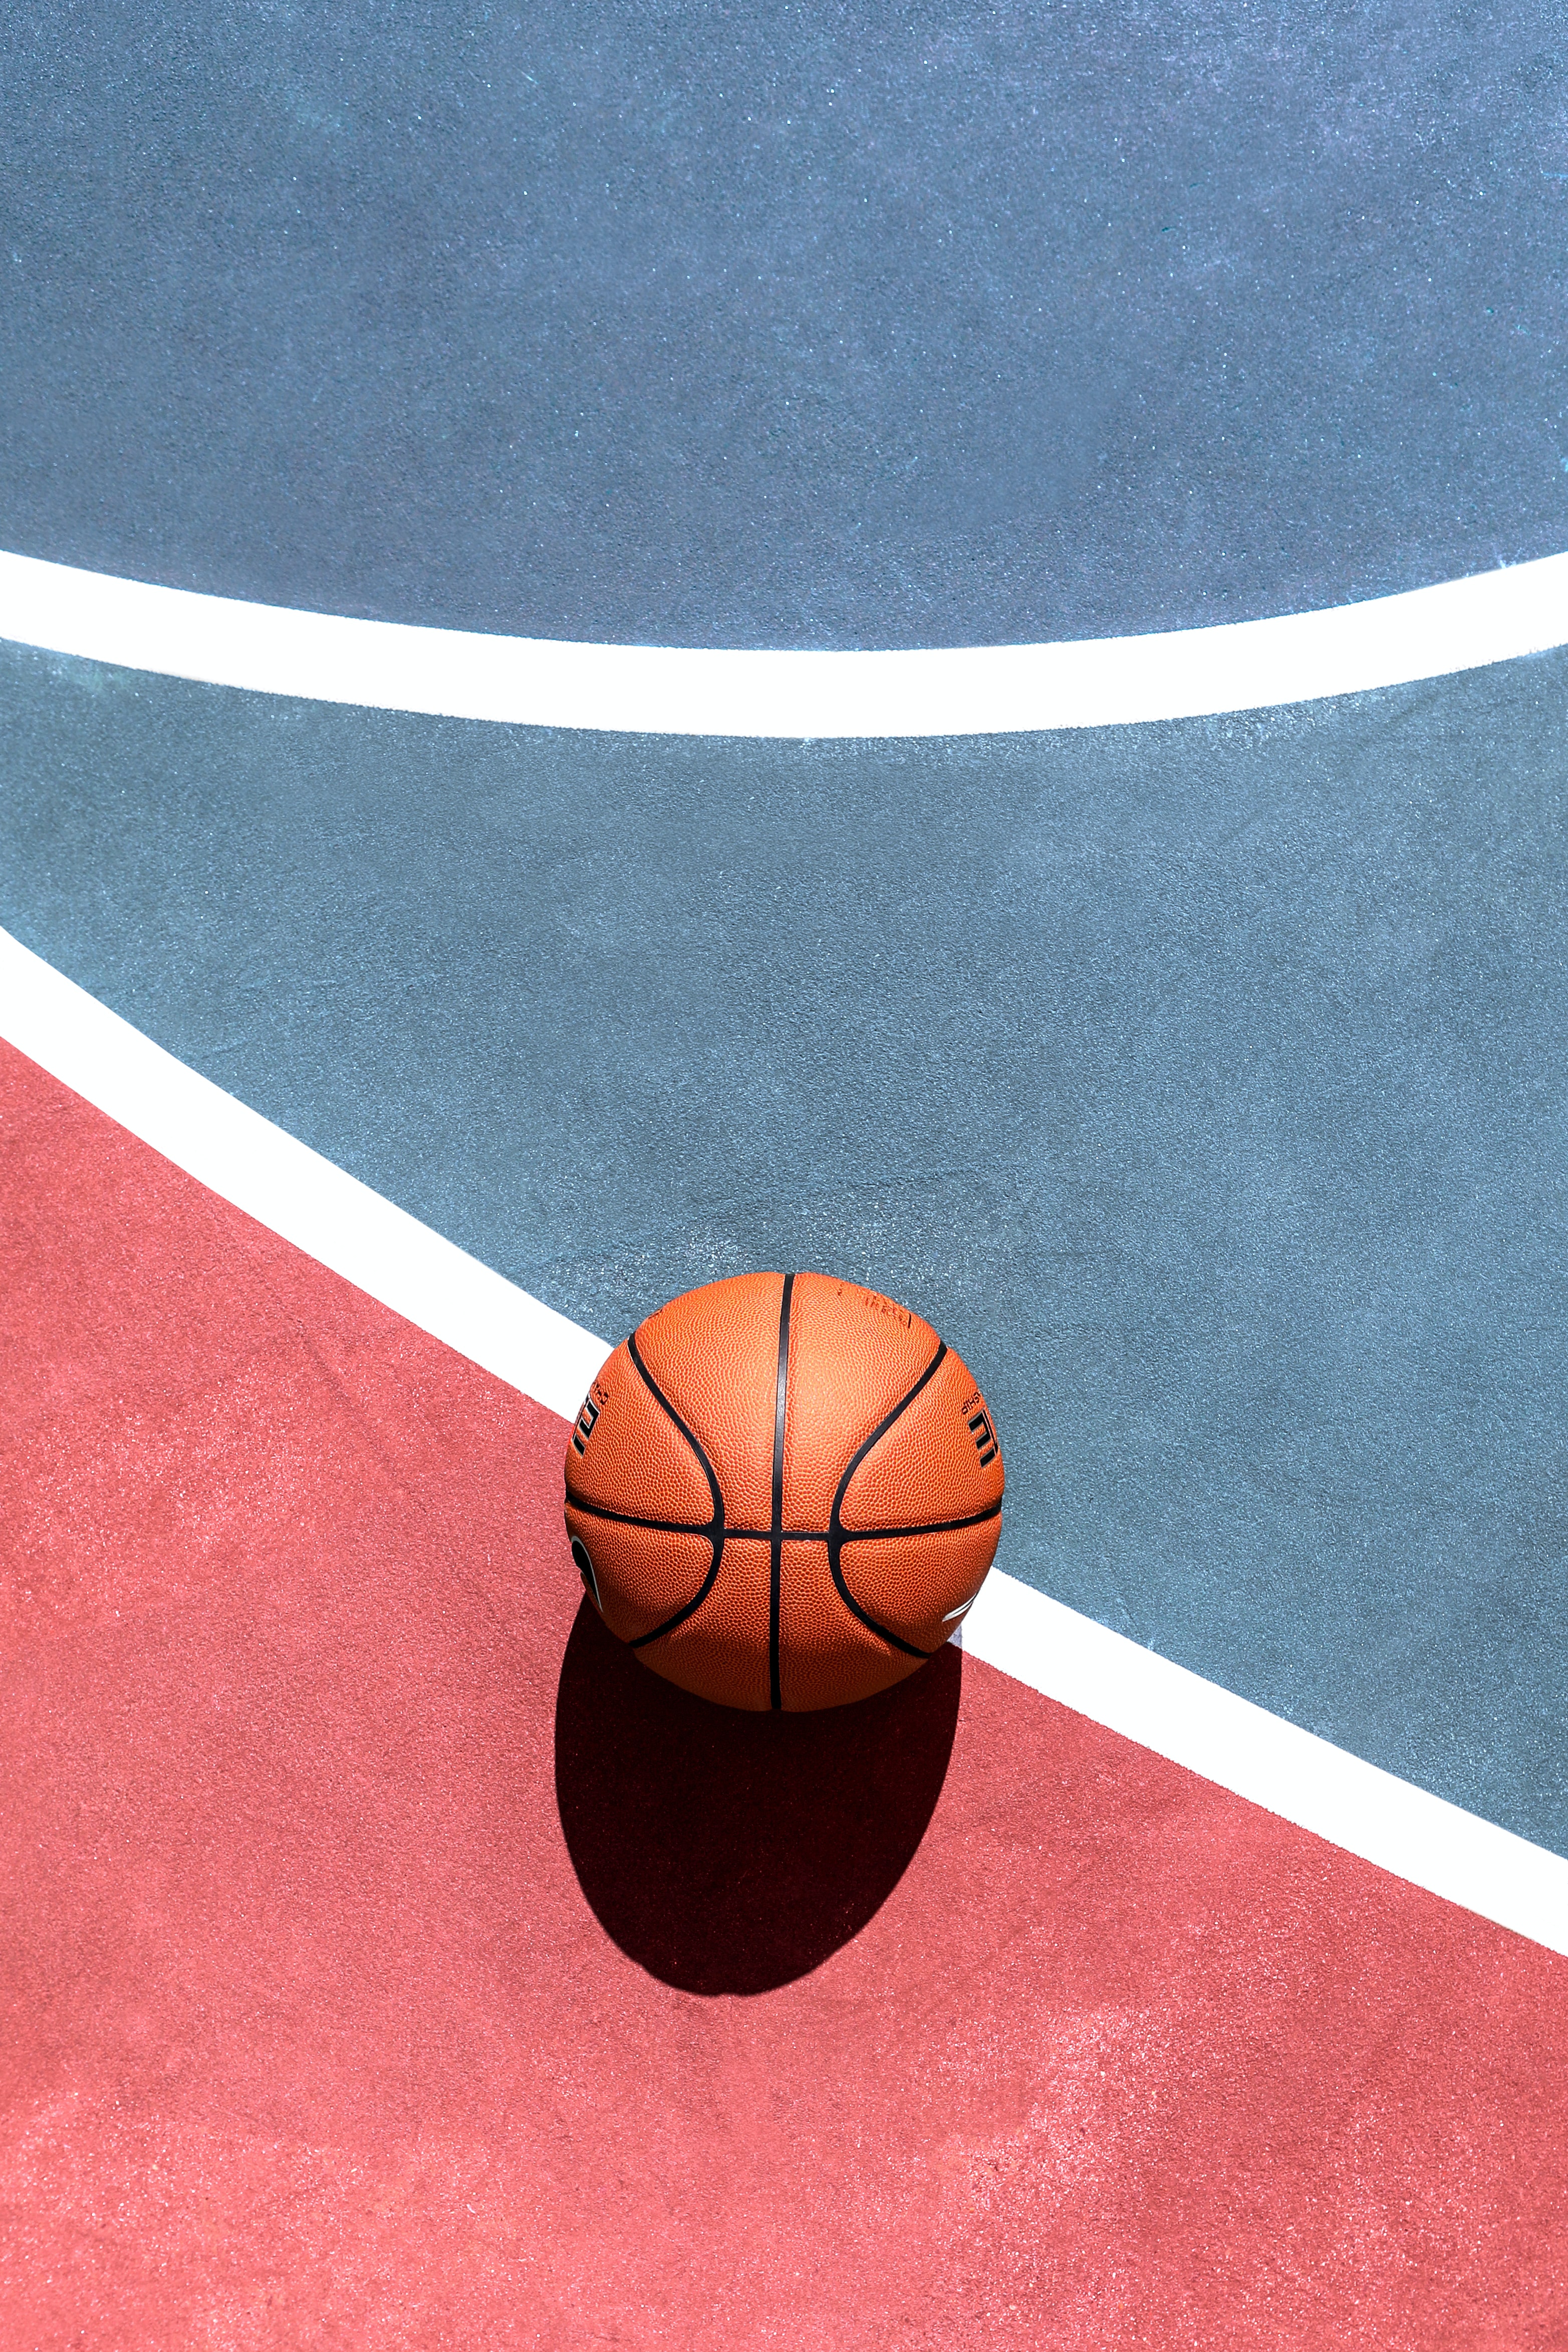 Cool Backgrounds ball, sports Basketball